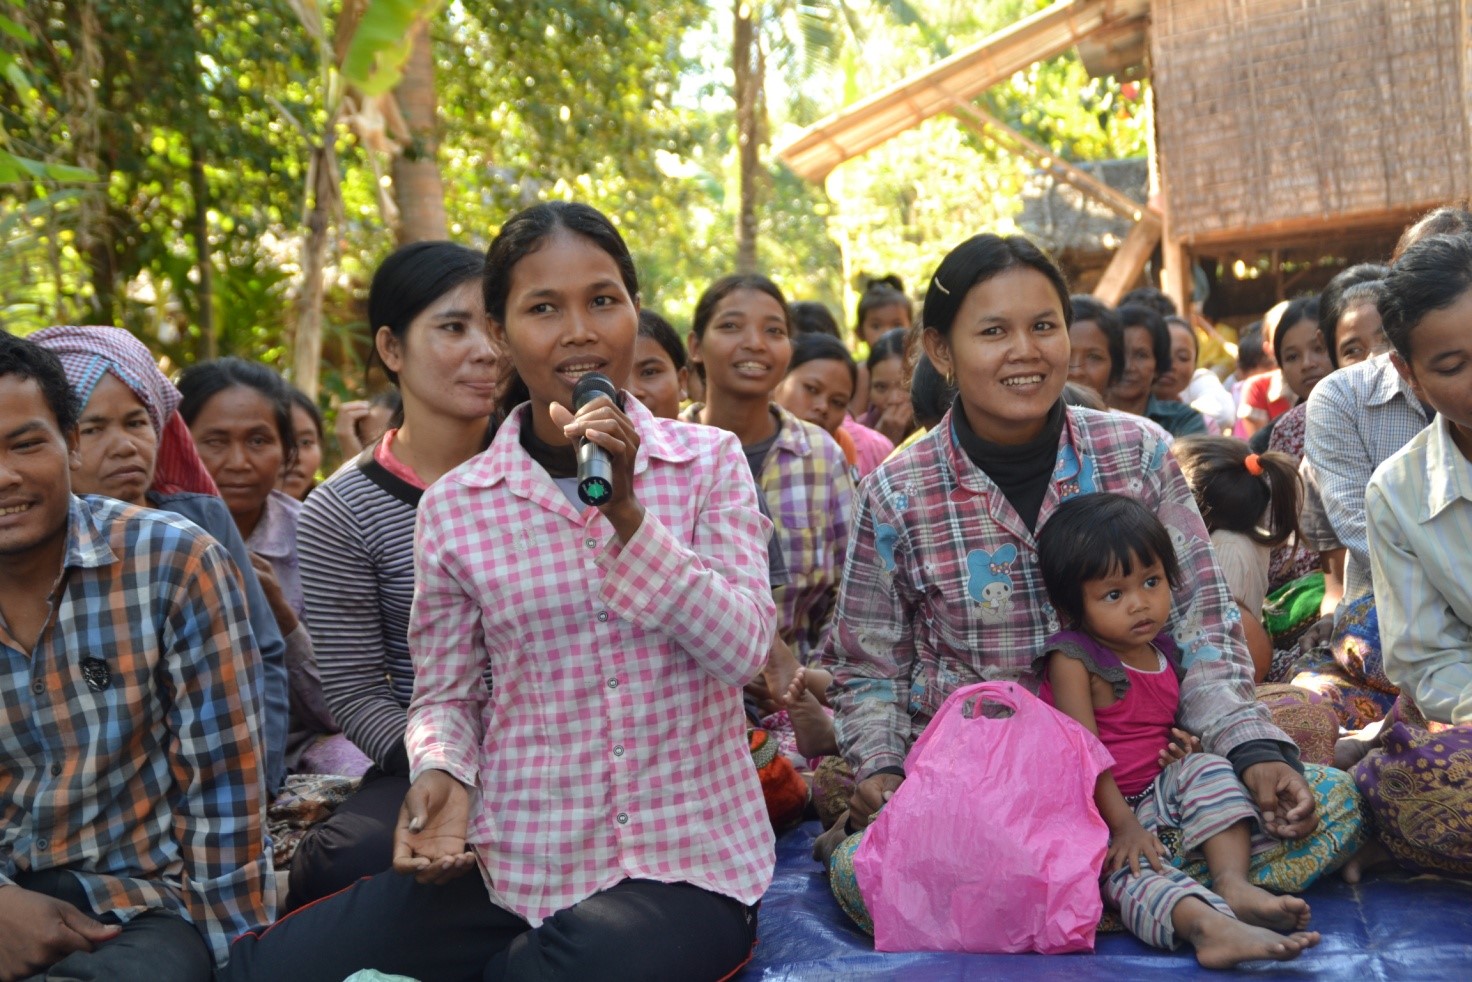 attraction-Banteay Meanchey Population Sholarship Family.jpg